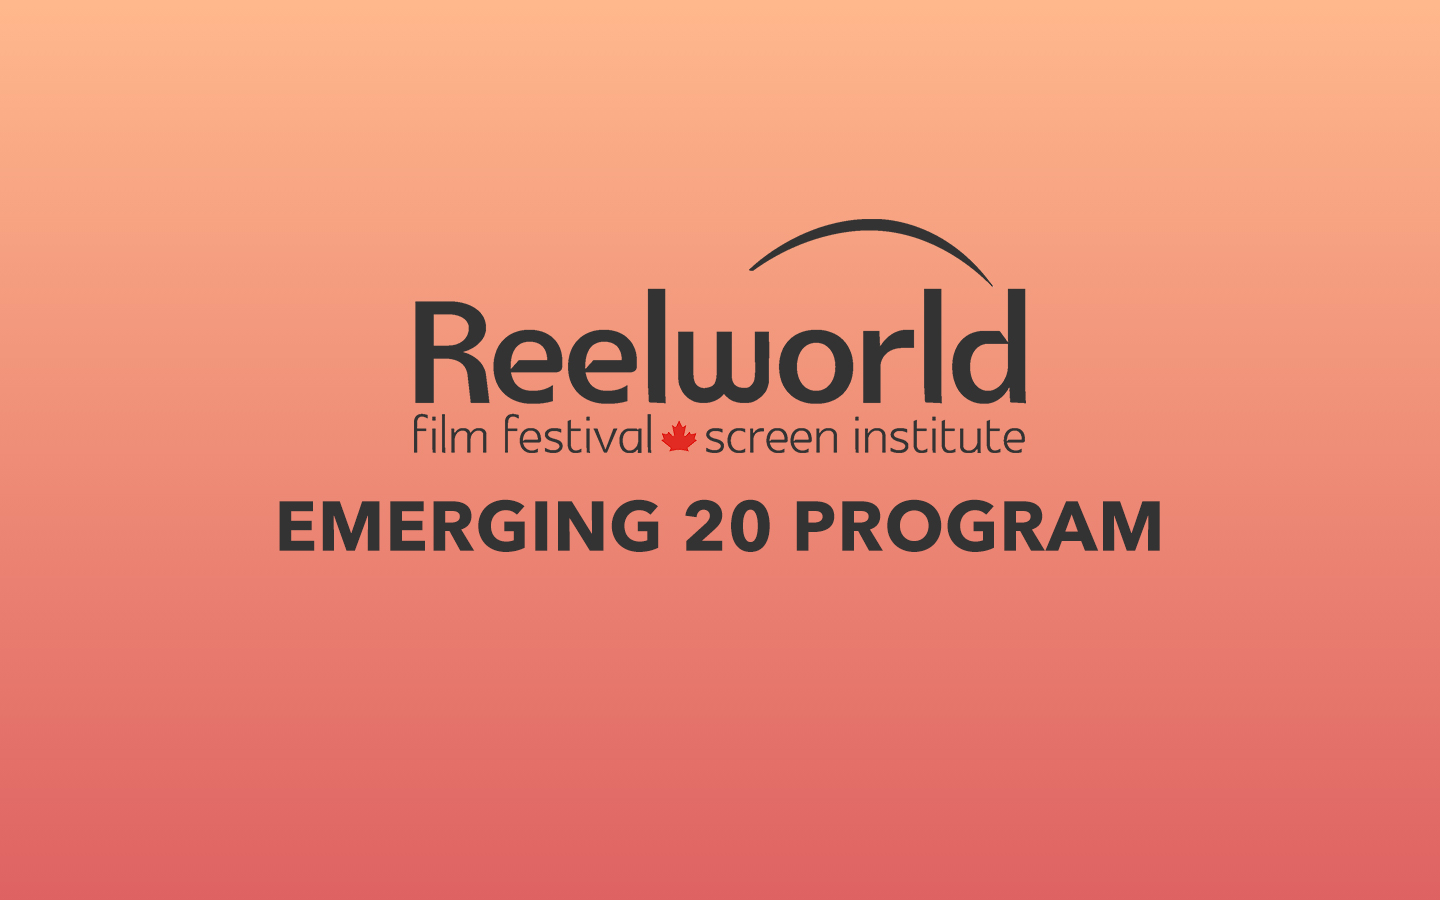 Reelworld Film Festival and Screen Institute, Emerging 20, E20, 2020, Class, Program, talent lab, announced, Helmann Wilhelm, Creemore Village, Telefilm Talent to watch fund, feature film, canted pictures, recipient